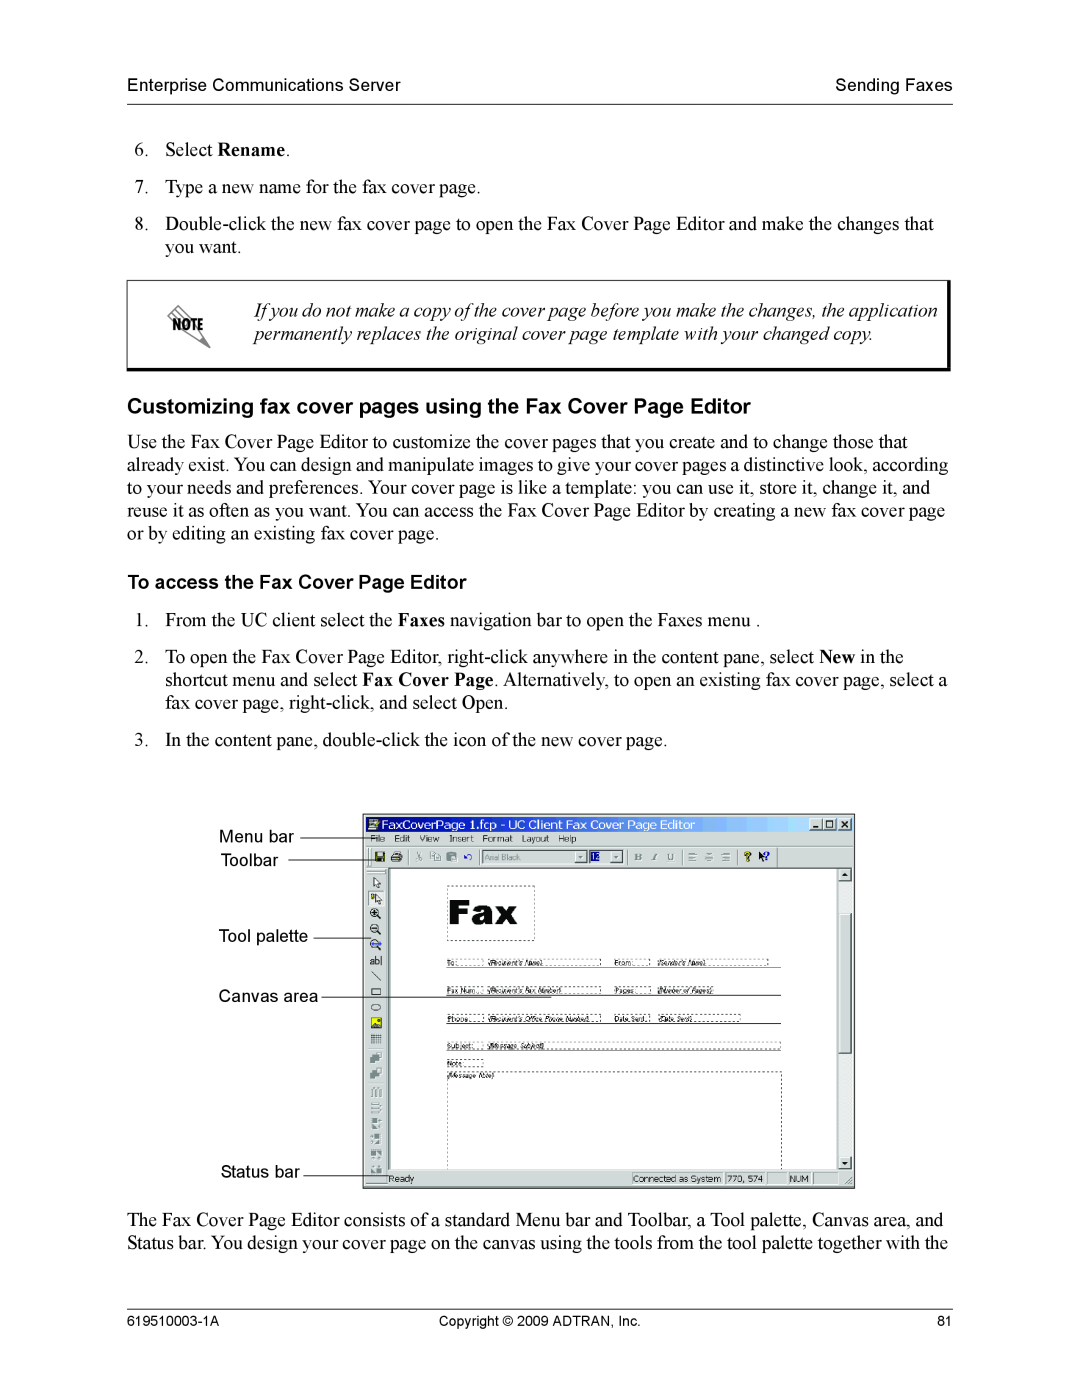 ADTRAN 619510003-1A manual Customizing fax cover pages using the Fax Cover Page Editor, To access the Fax Cover Page Editor 